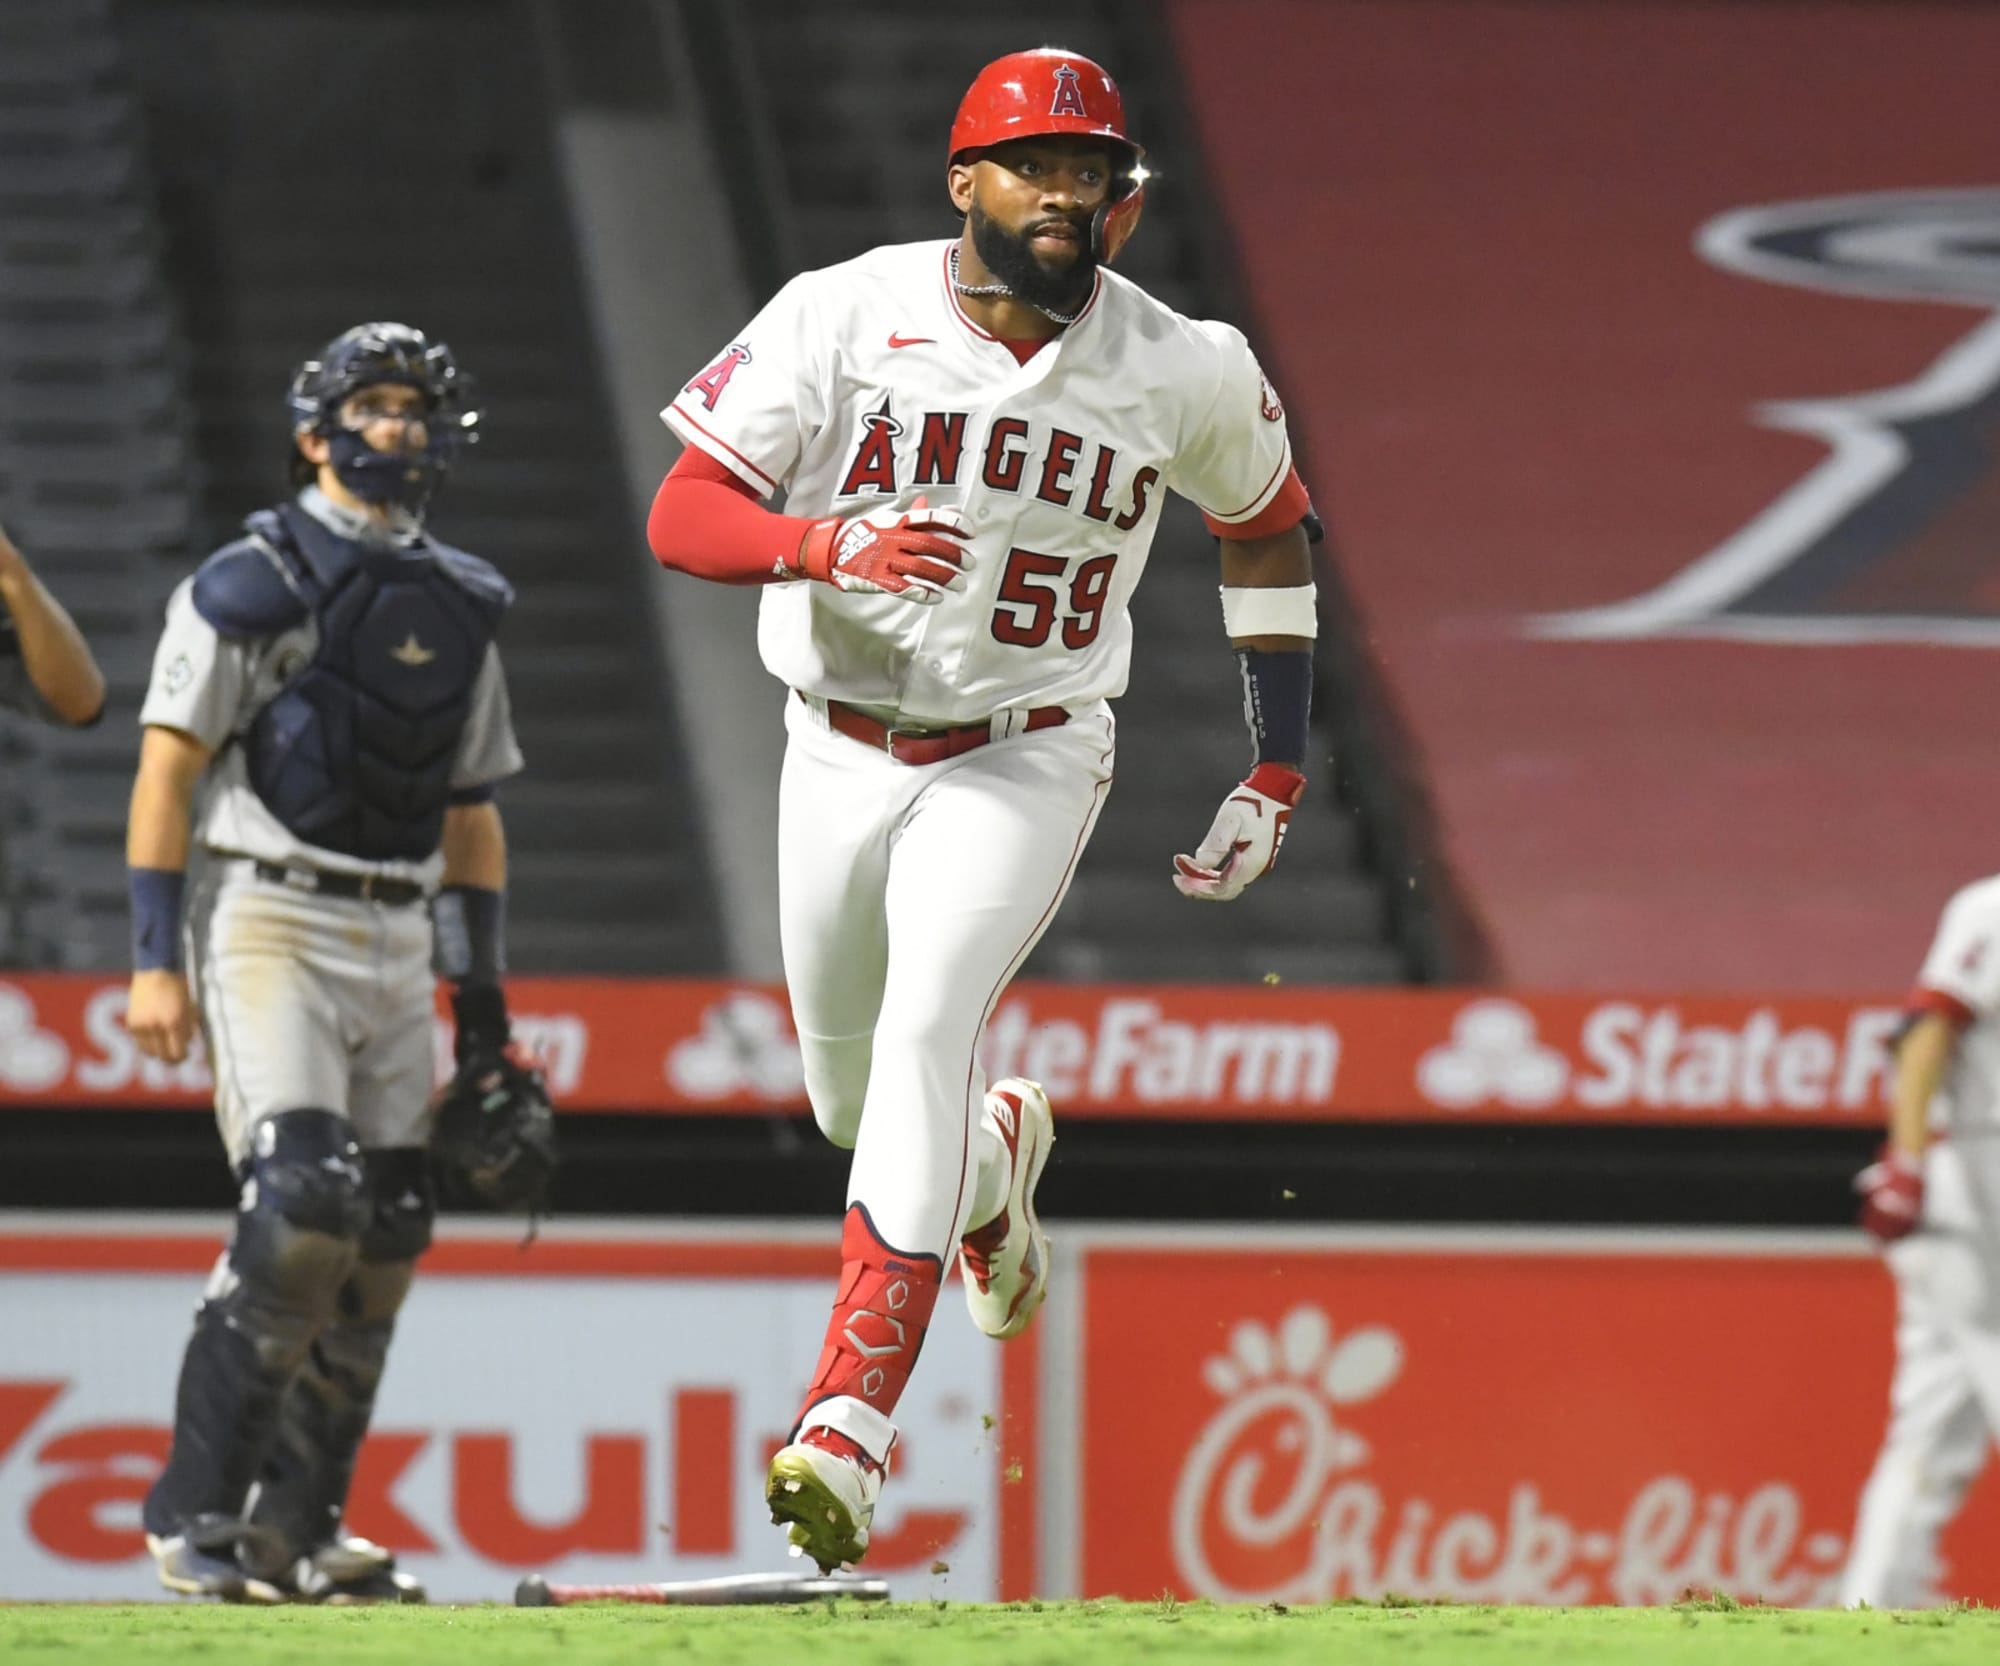 LA Angels 2021 spring training guide who will start in right field?